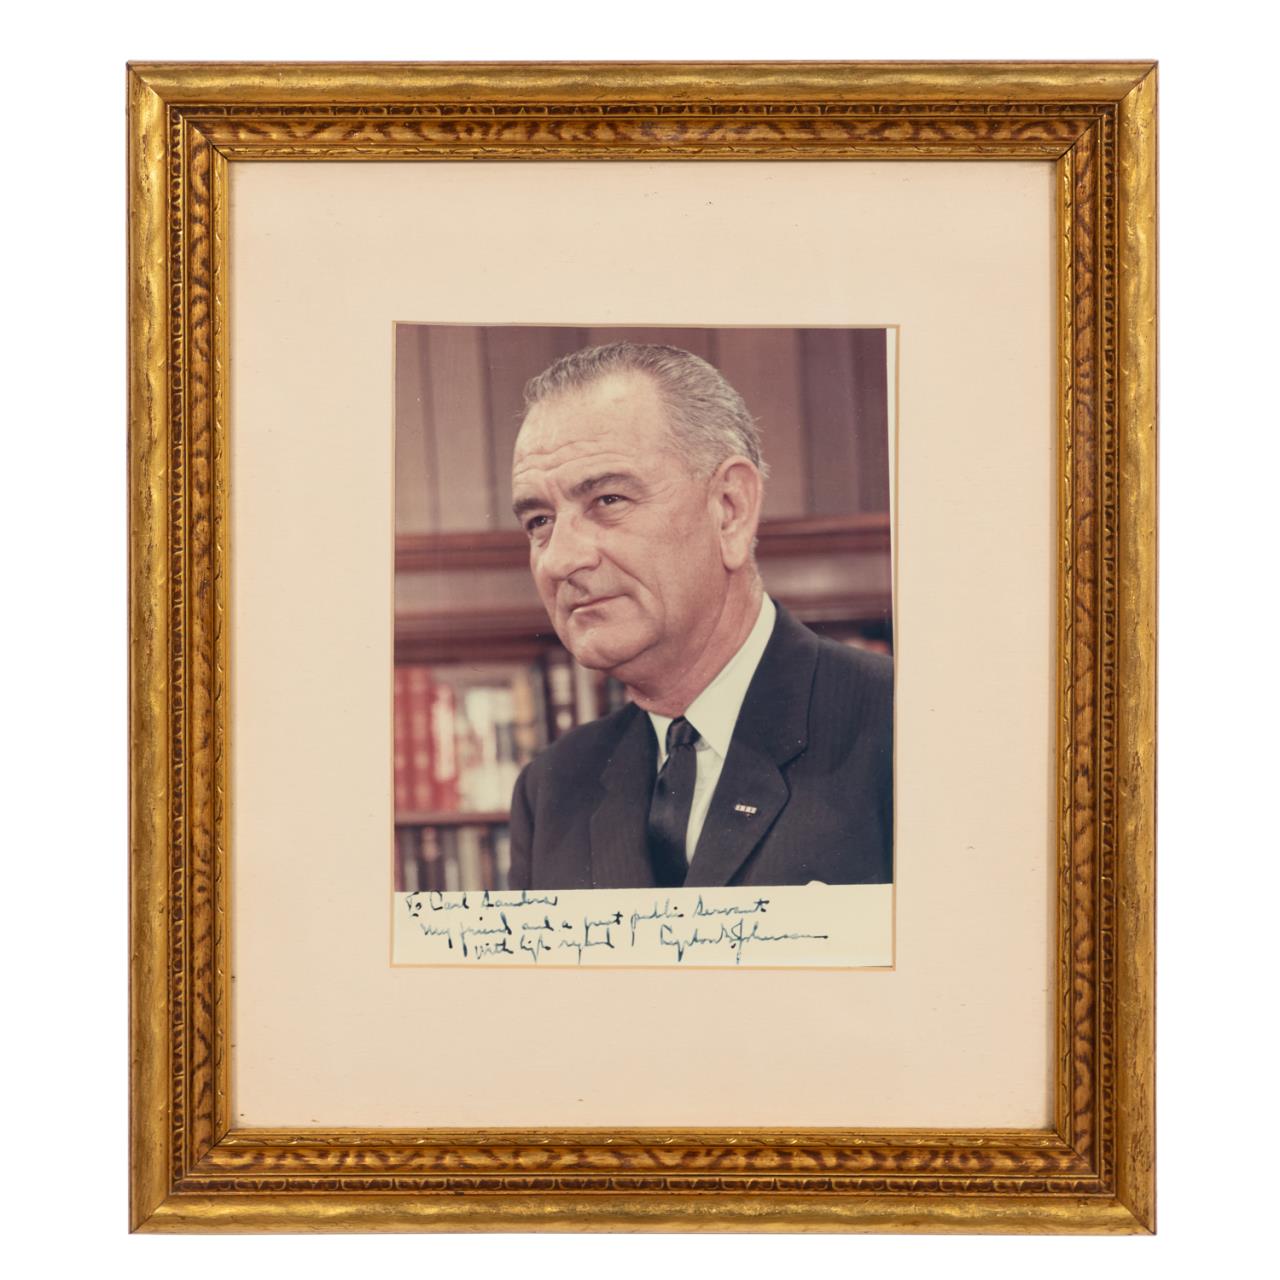 PRES JOHNSON SIGNED PHOTOGRAPH 2bfe1d